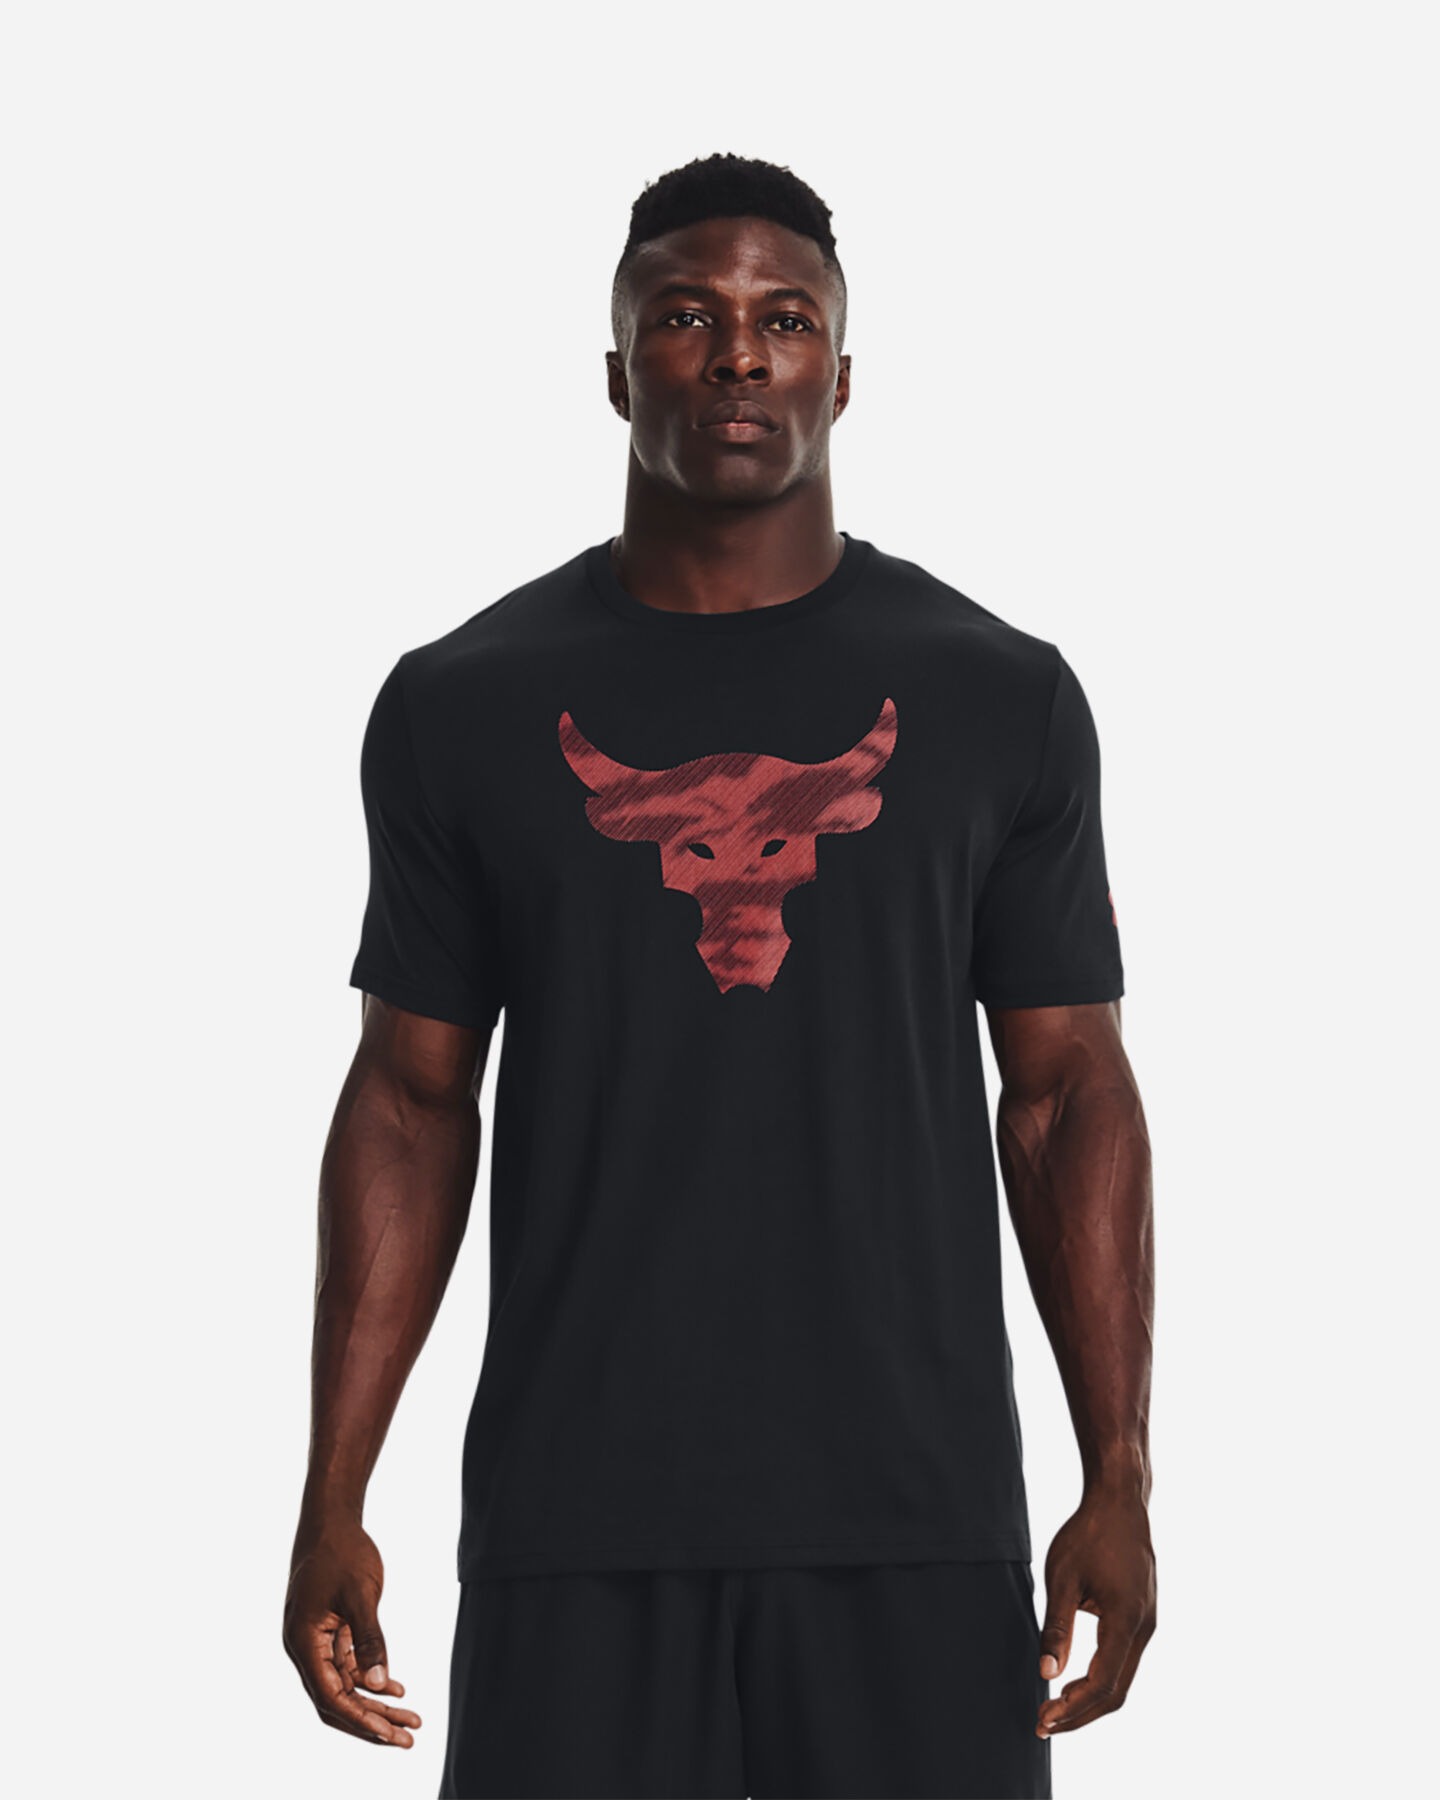  T-Shirt UNDER ARMOUR THE ROCK BRAHMA BULL M S5390726|0001|XS scatto 2